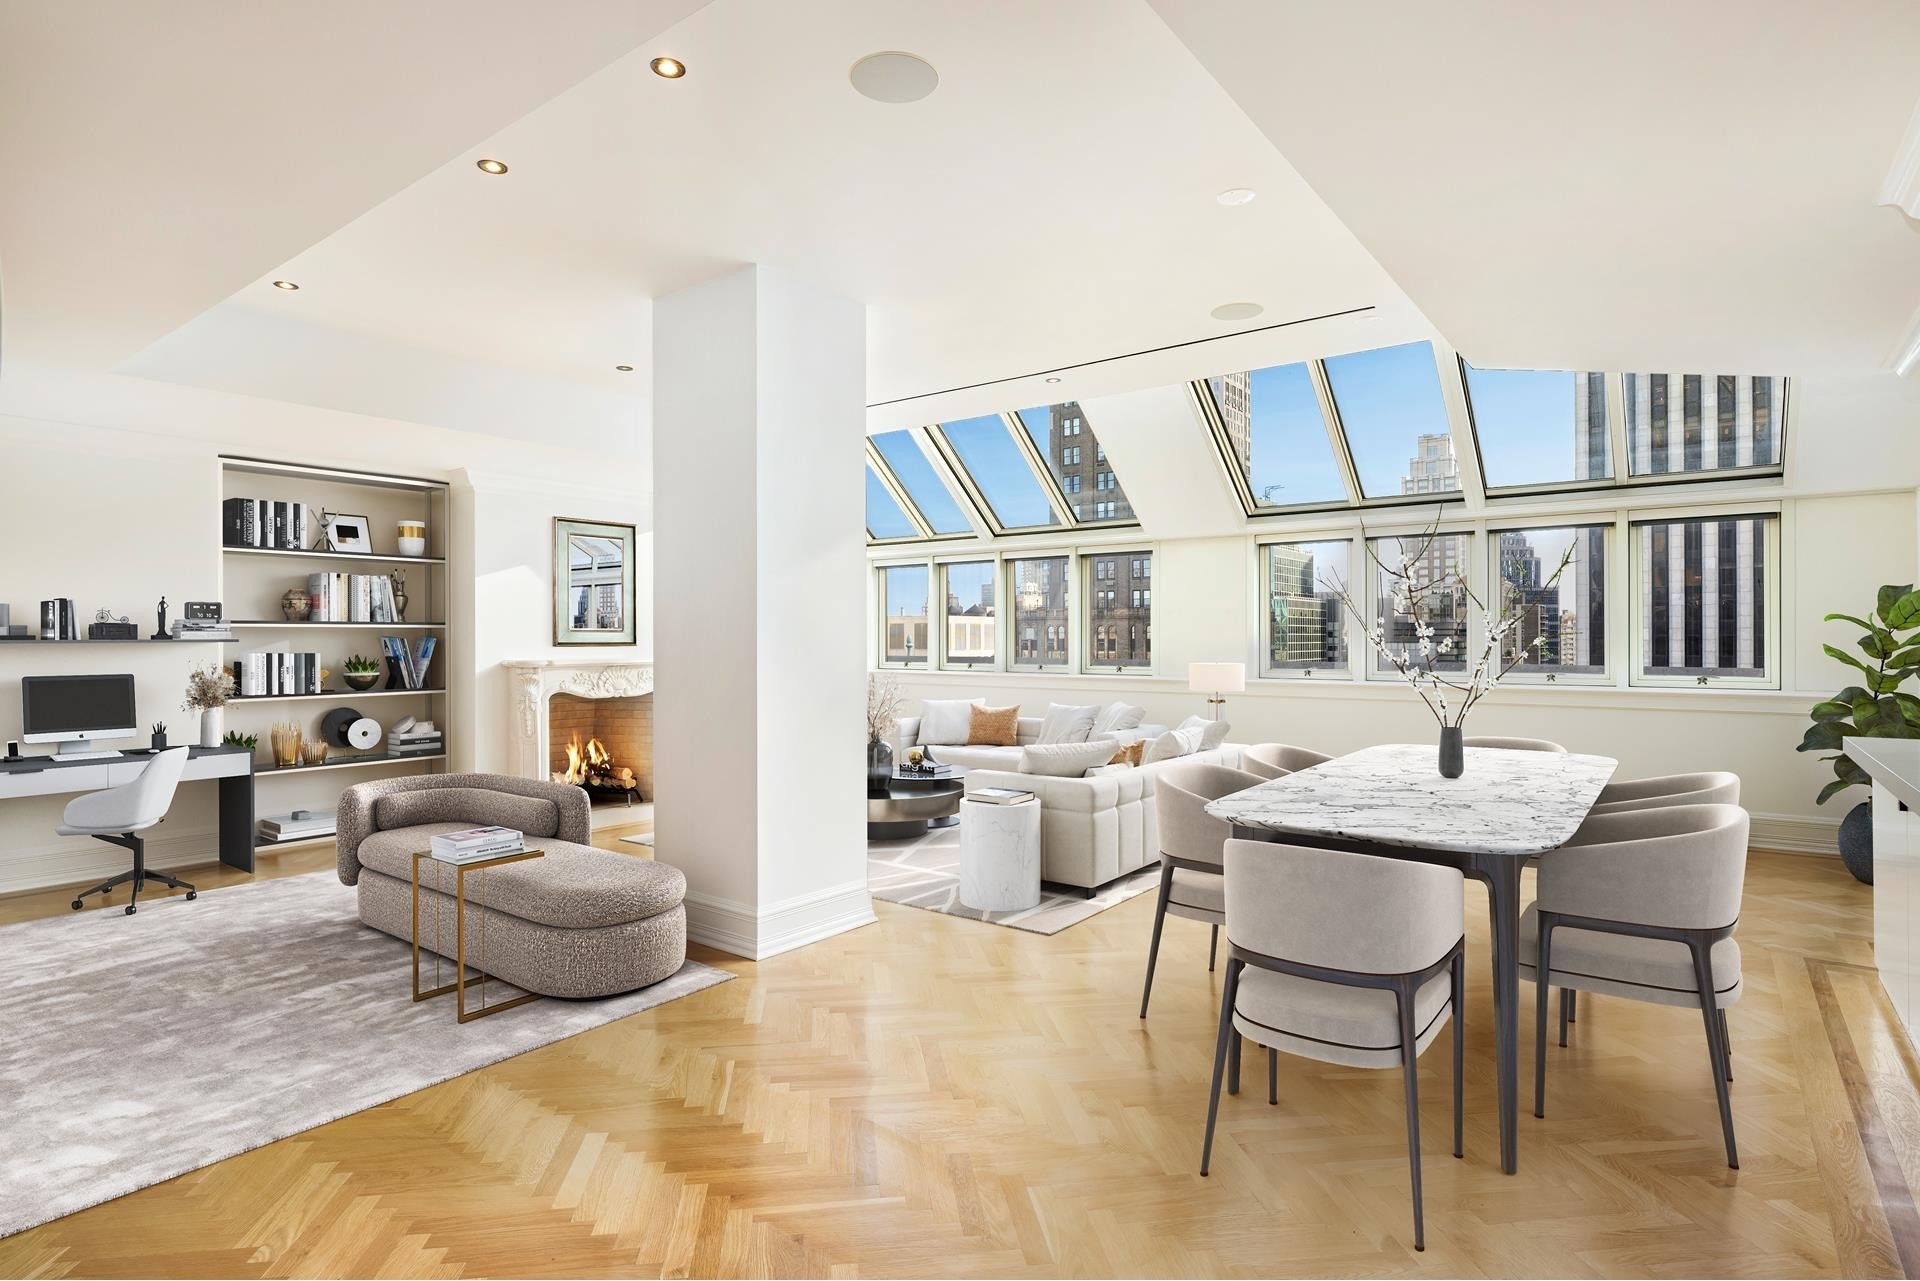 Condominium for Sale at The Plaza Residence, 1 CENTRAL PARK S, PH11 Central Park South, New York, New York 10019